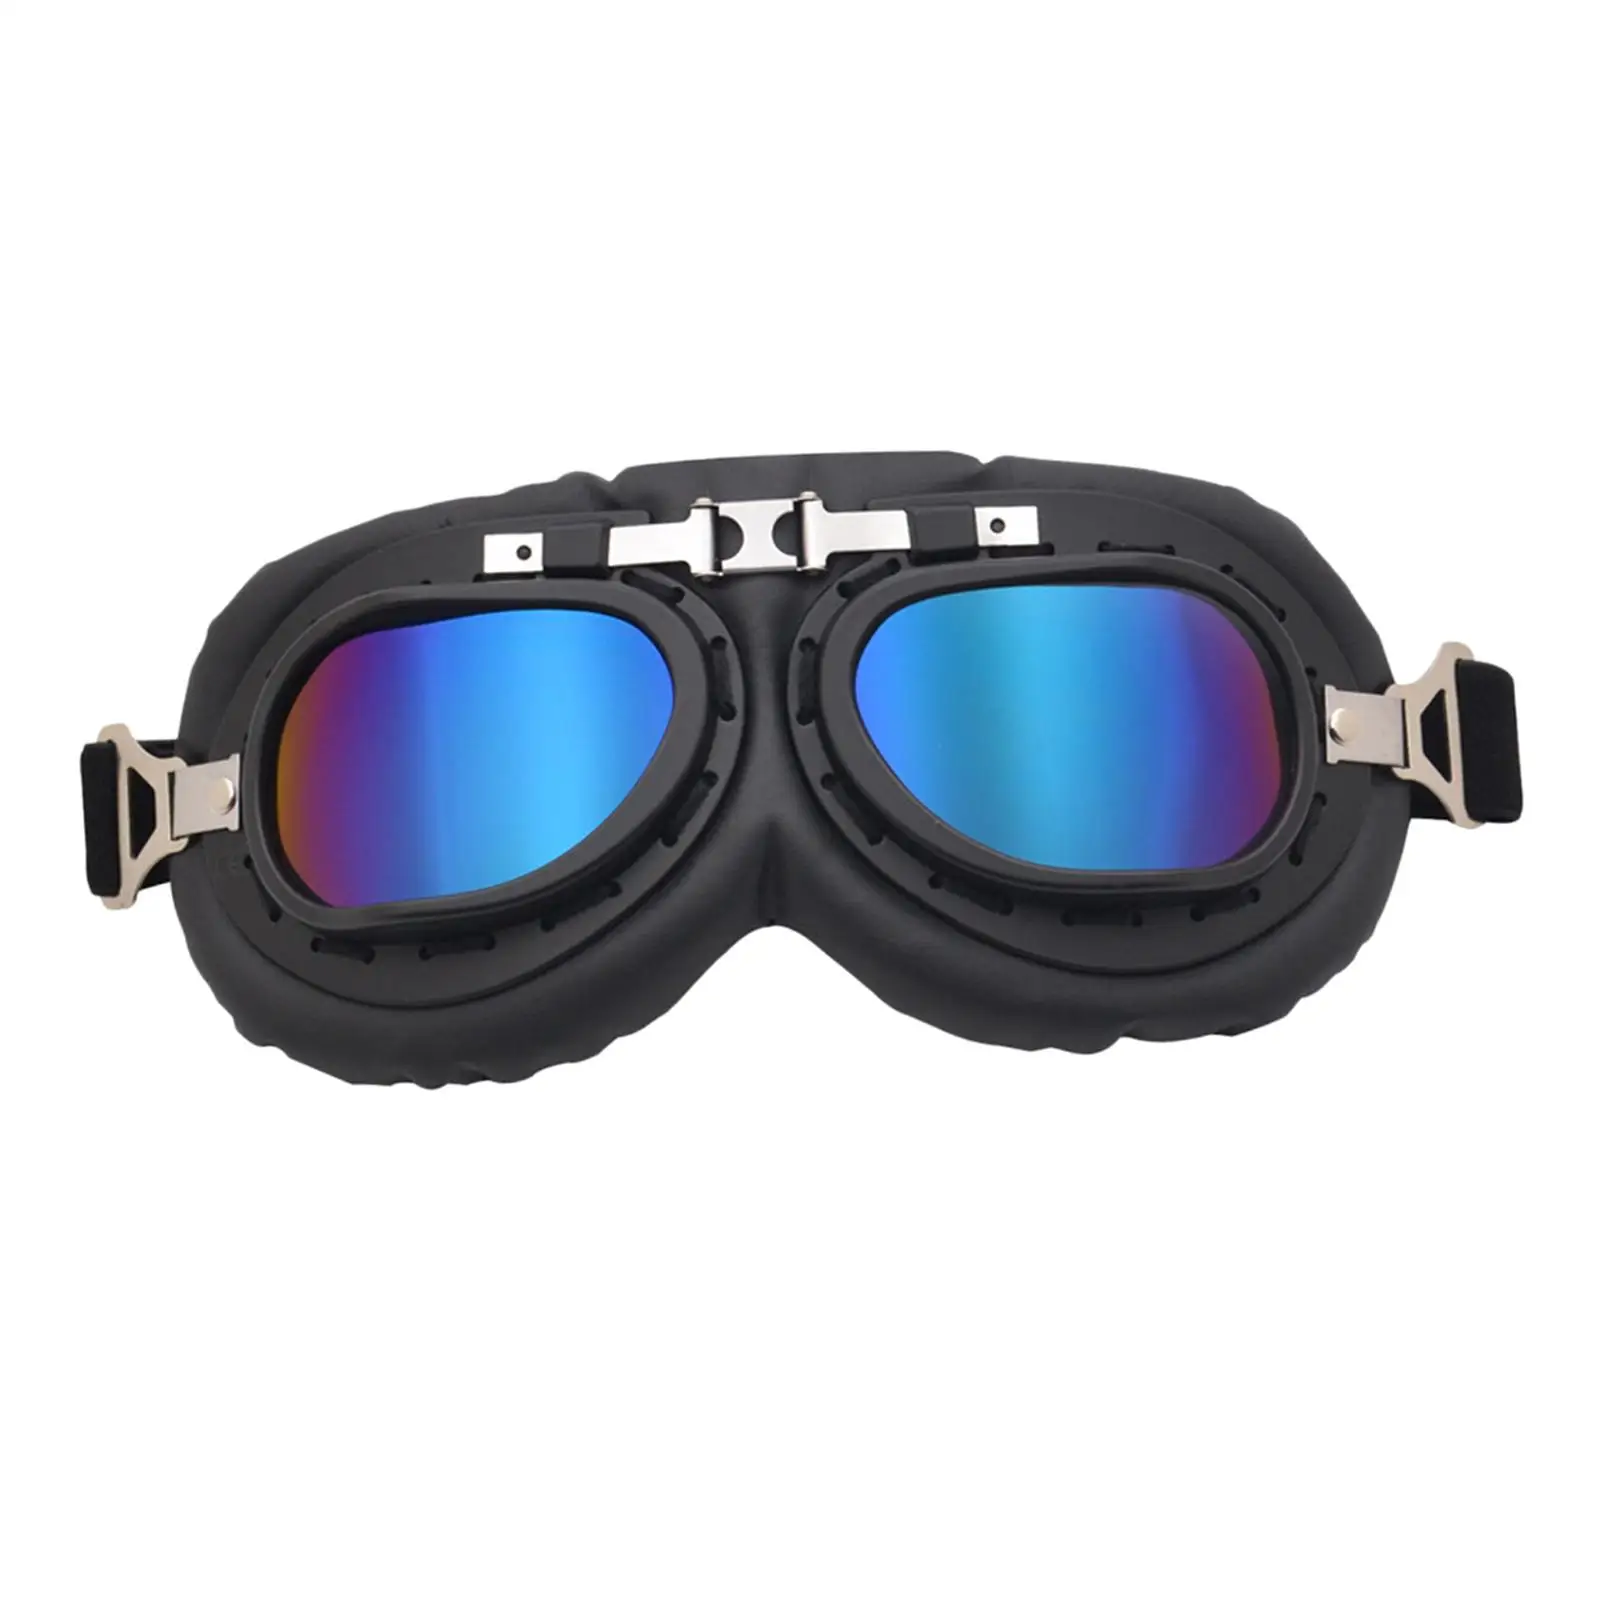 Motorcycle Goggles Classic Anti-Scratch Vintage Fit for Off-Road ATV